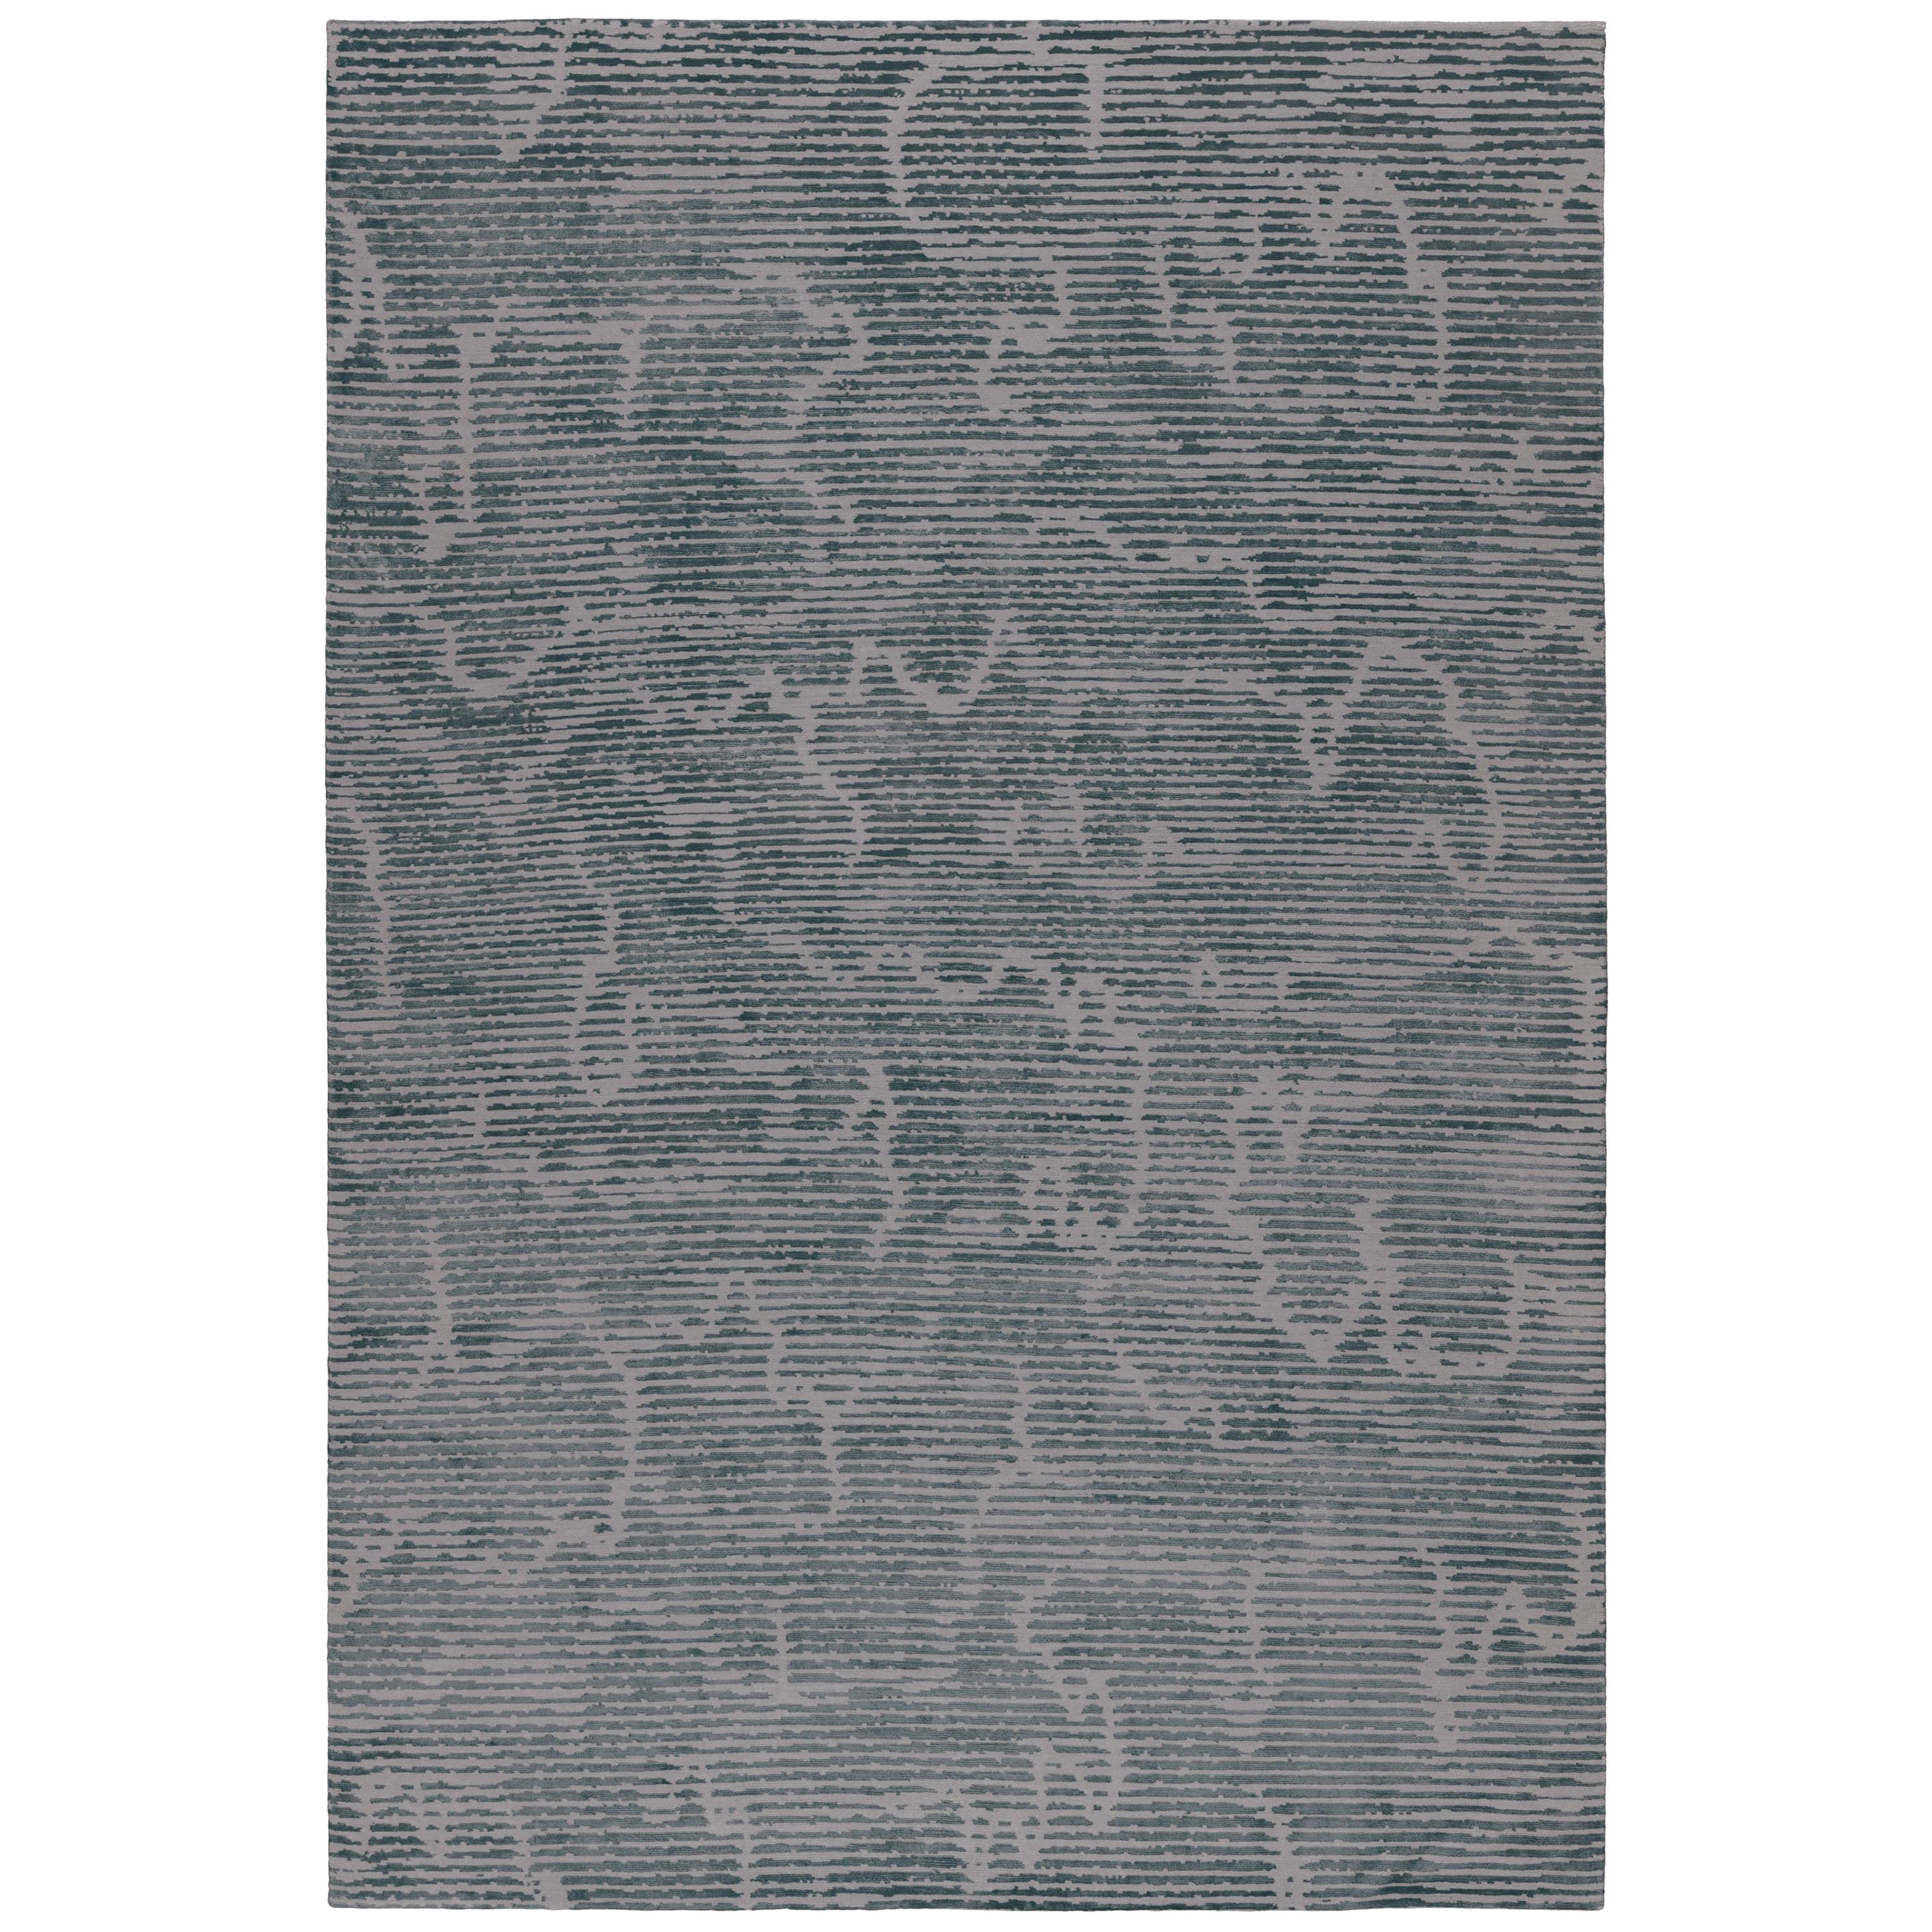 Staccato Steel Hand-Knotted 9x6 Rug in Wool and Silk by Kelly Wearstler